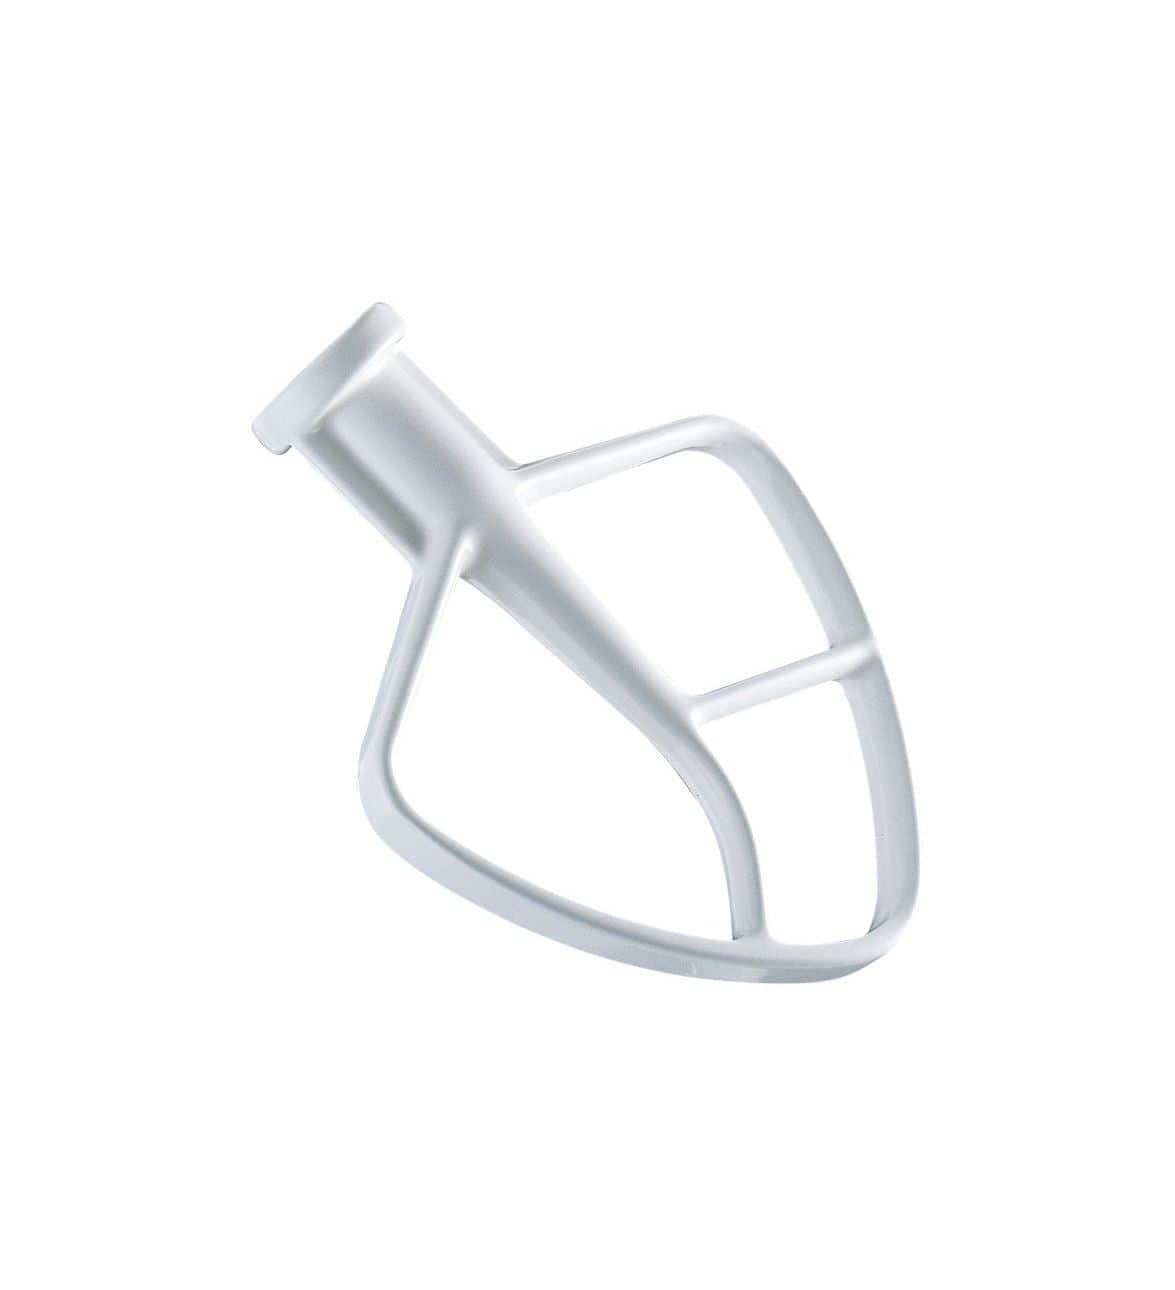  W10490648 Beaters for Kitchen Aid Hand Mixer 2 Per Pack by  Femitu: Home & Kitchen